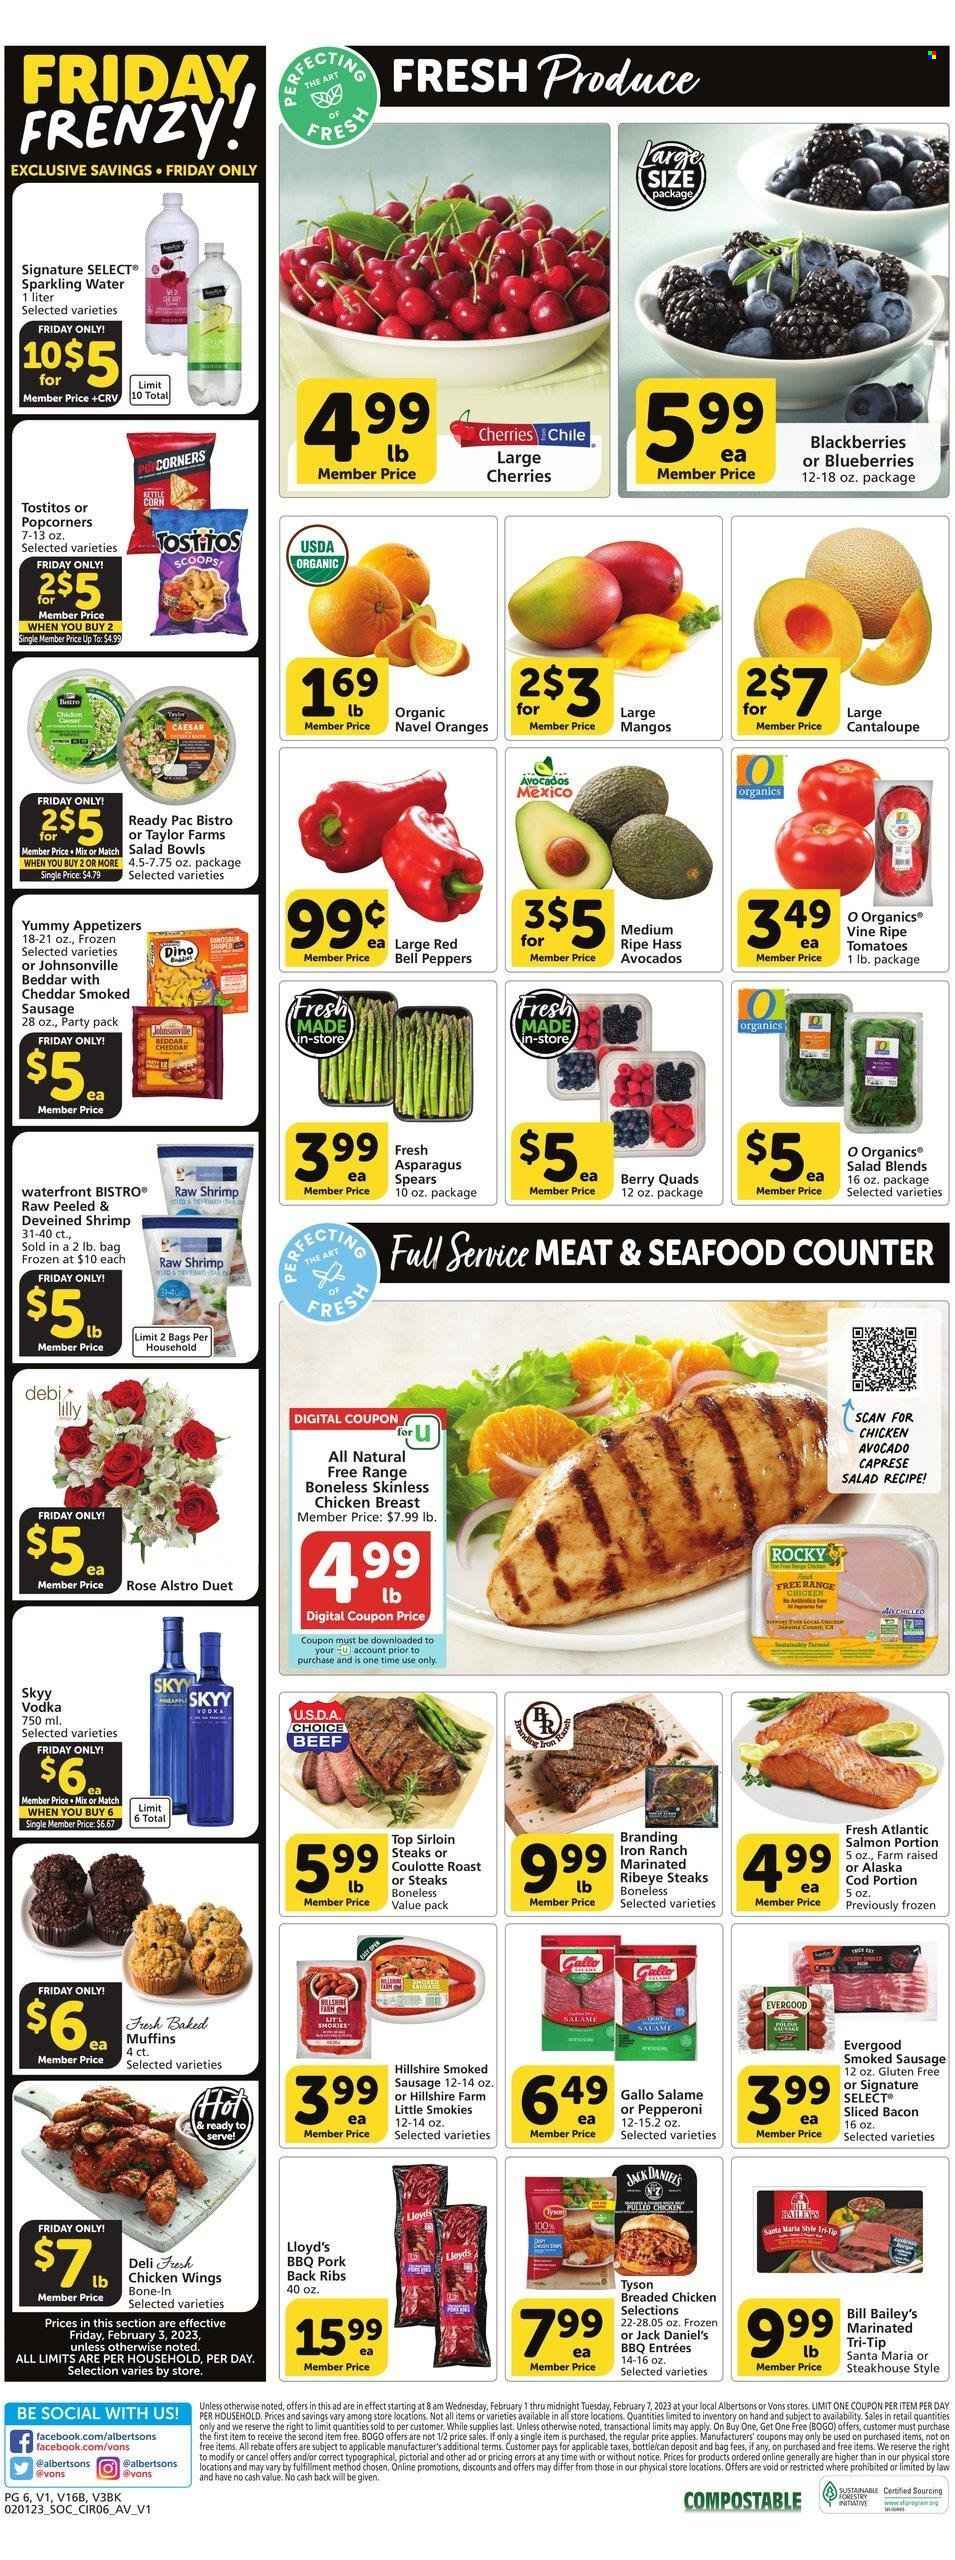 thumbnail - Albertsons Flyer - 02/01/2023 - 02/07/2023 - Sales products - muffin, cantaloupe, corn, tomatoes, avocado, blackberries, blueberries, cherries, oranges, cod, salmon, seafood, shrimps, Jack Daniel's, fried chicken, Ready Pac, pulled chicken, bacon, Hillshire Farm, Johnsonville, sausage, smoked sausage, pepperoni, cheese, chicken wings, popcorn, Tostitos, sparkling water, wine, rosé wine, vodka, SKYY, beef meat, steak, sirloin steak, ribeye steak, ribs, pork meat, pork ribs, pork back ribs, salad bowl, rose, navel oranges. Page 6.